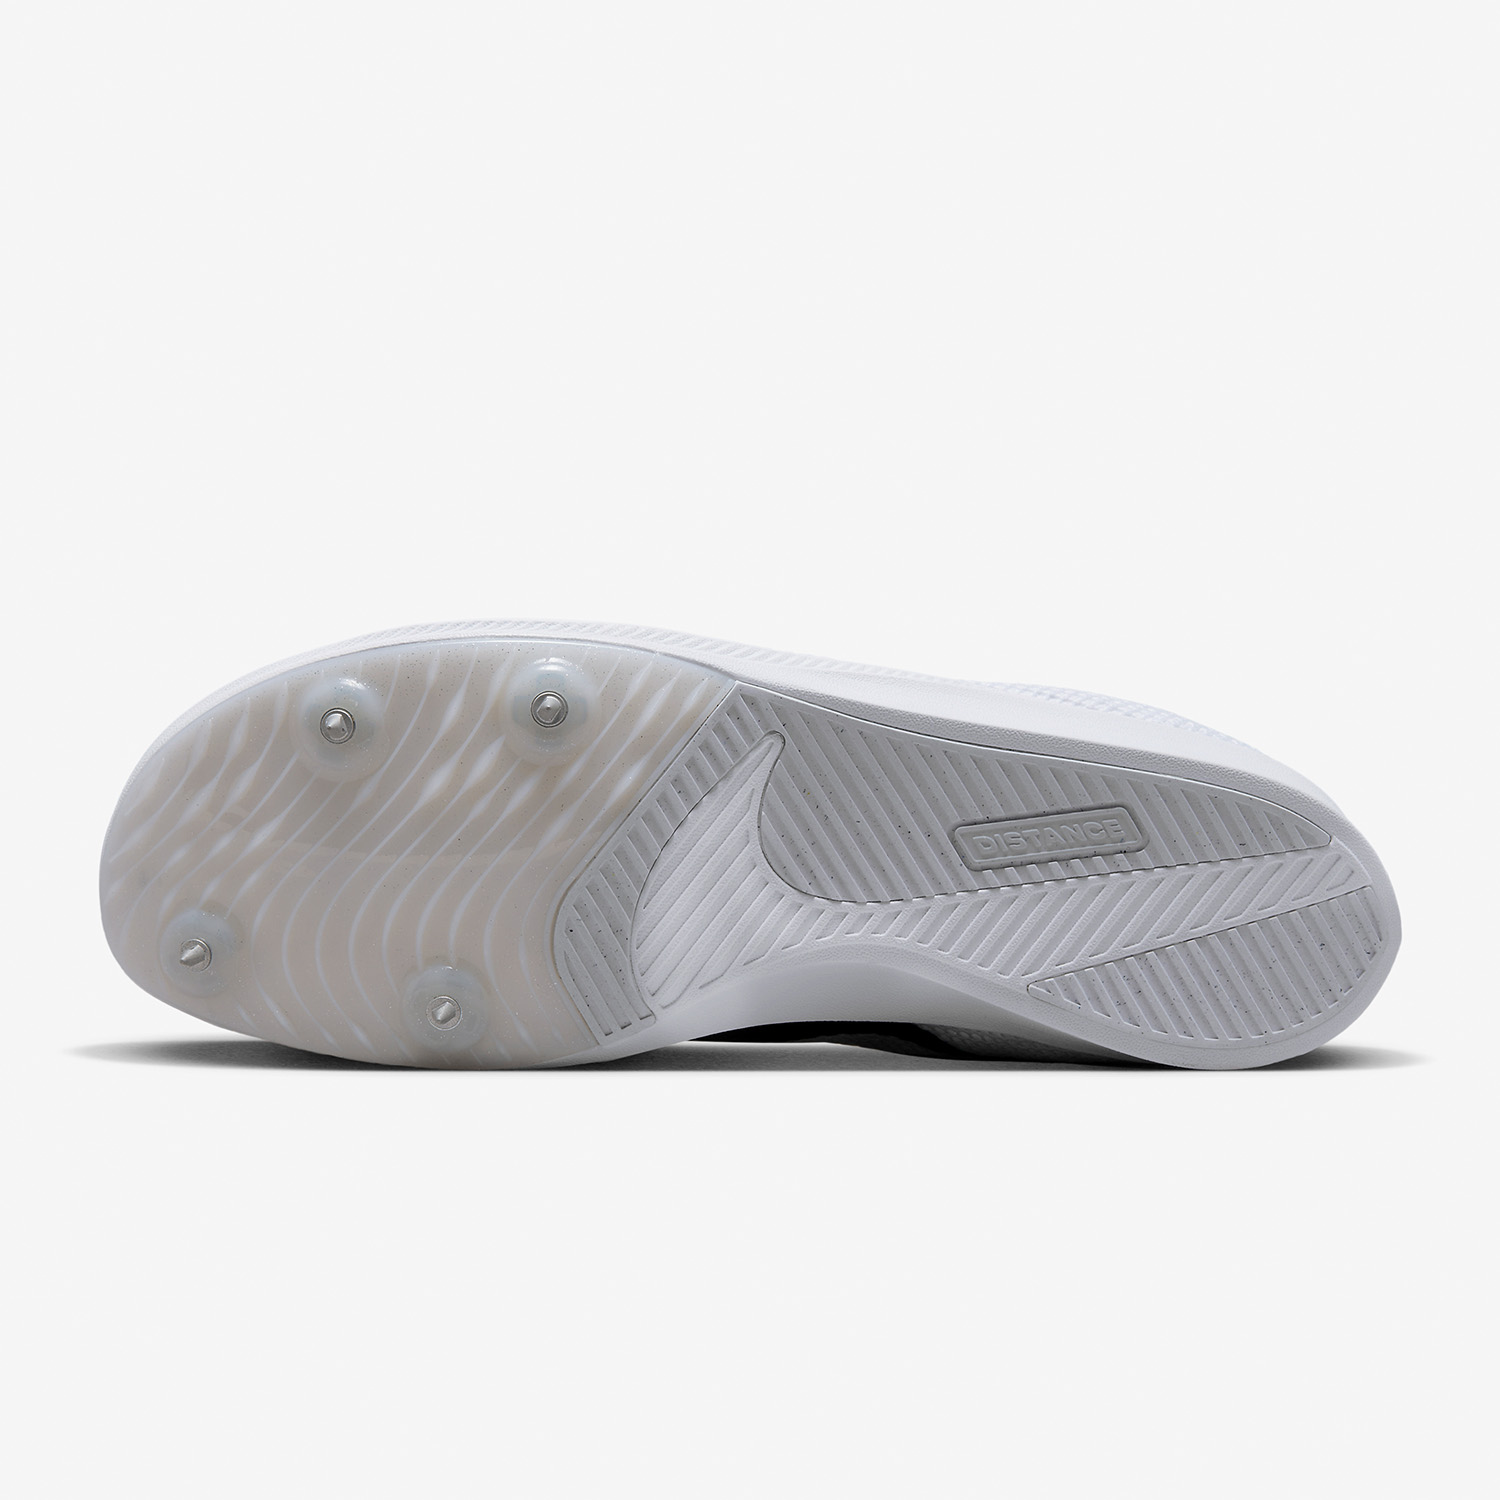 Nike Zoom Rival Distance Racing Shoes - White/Black